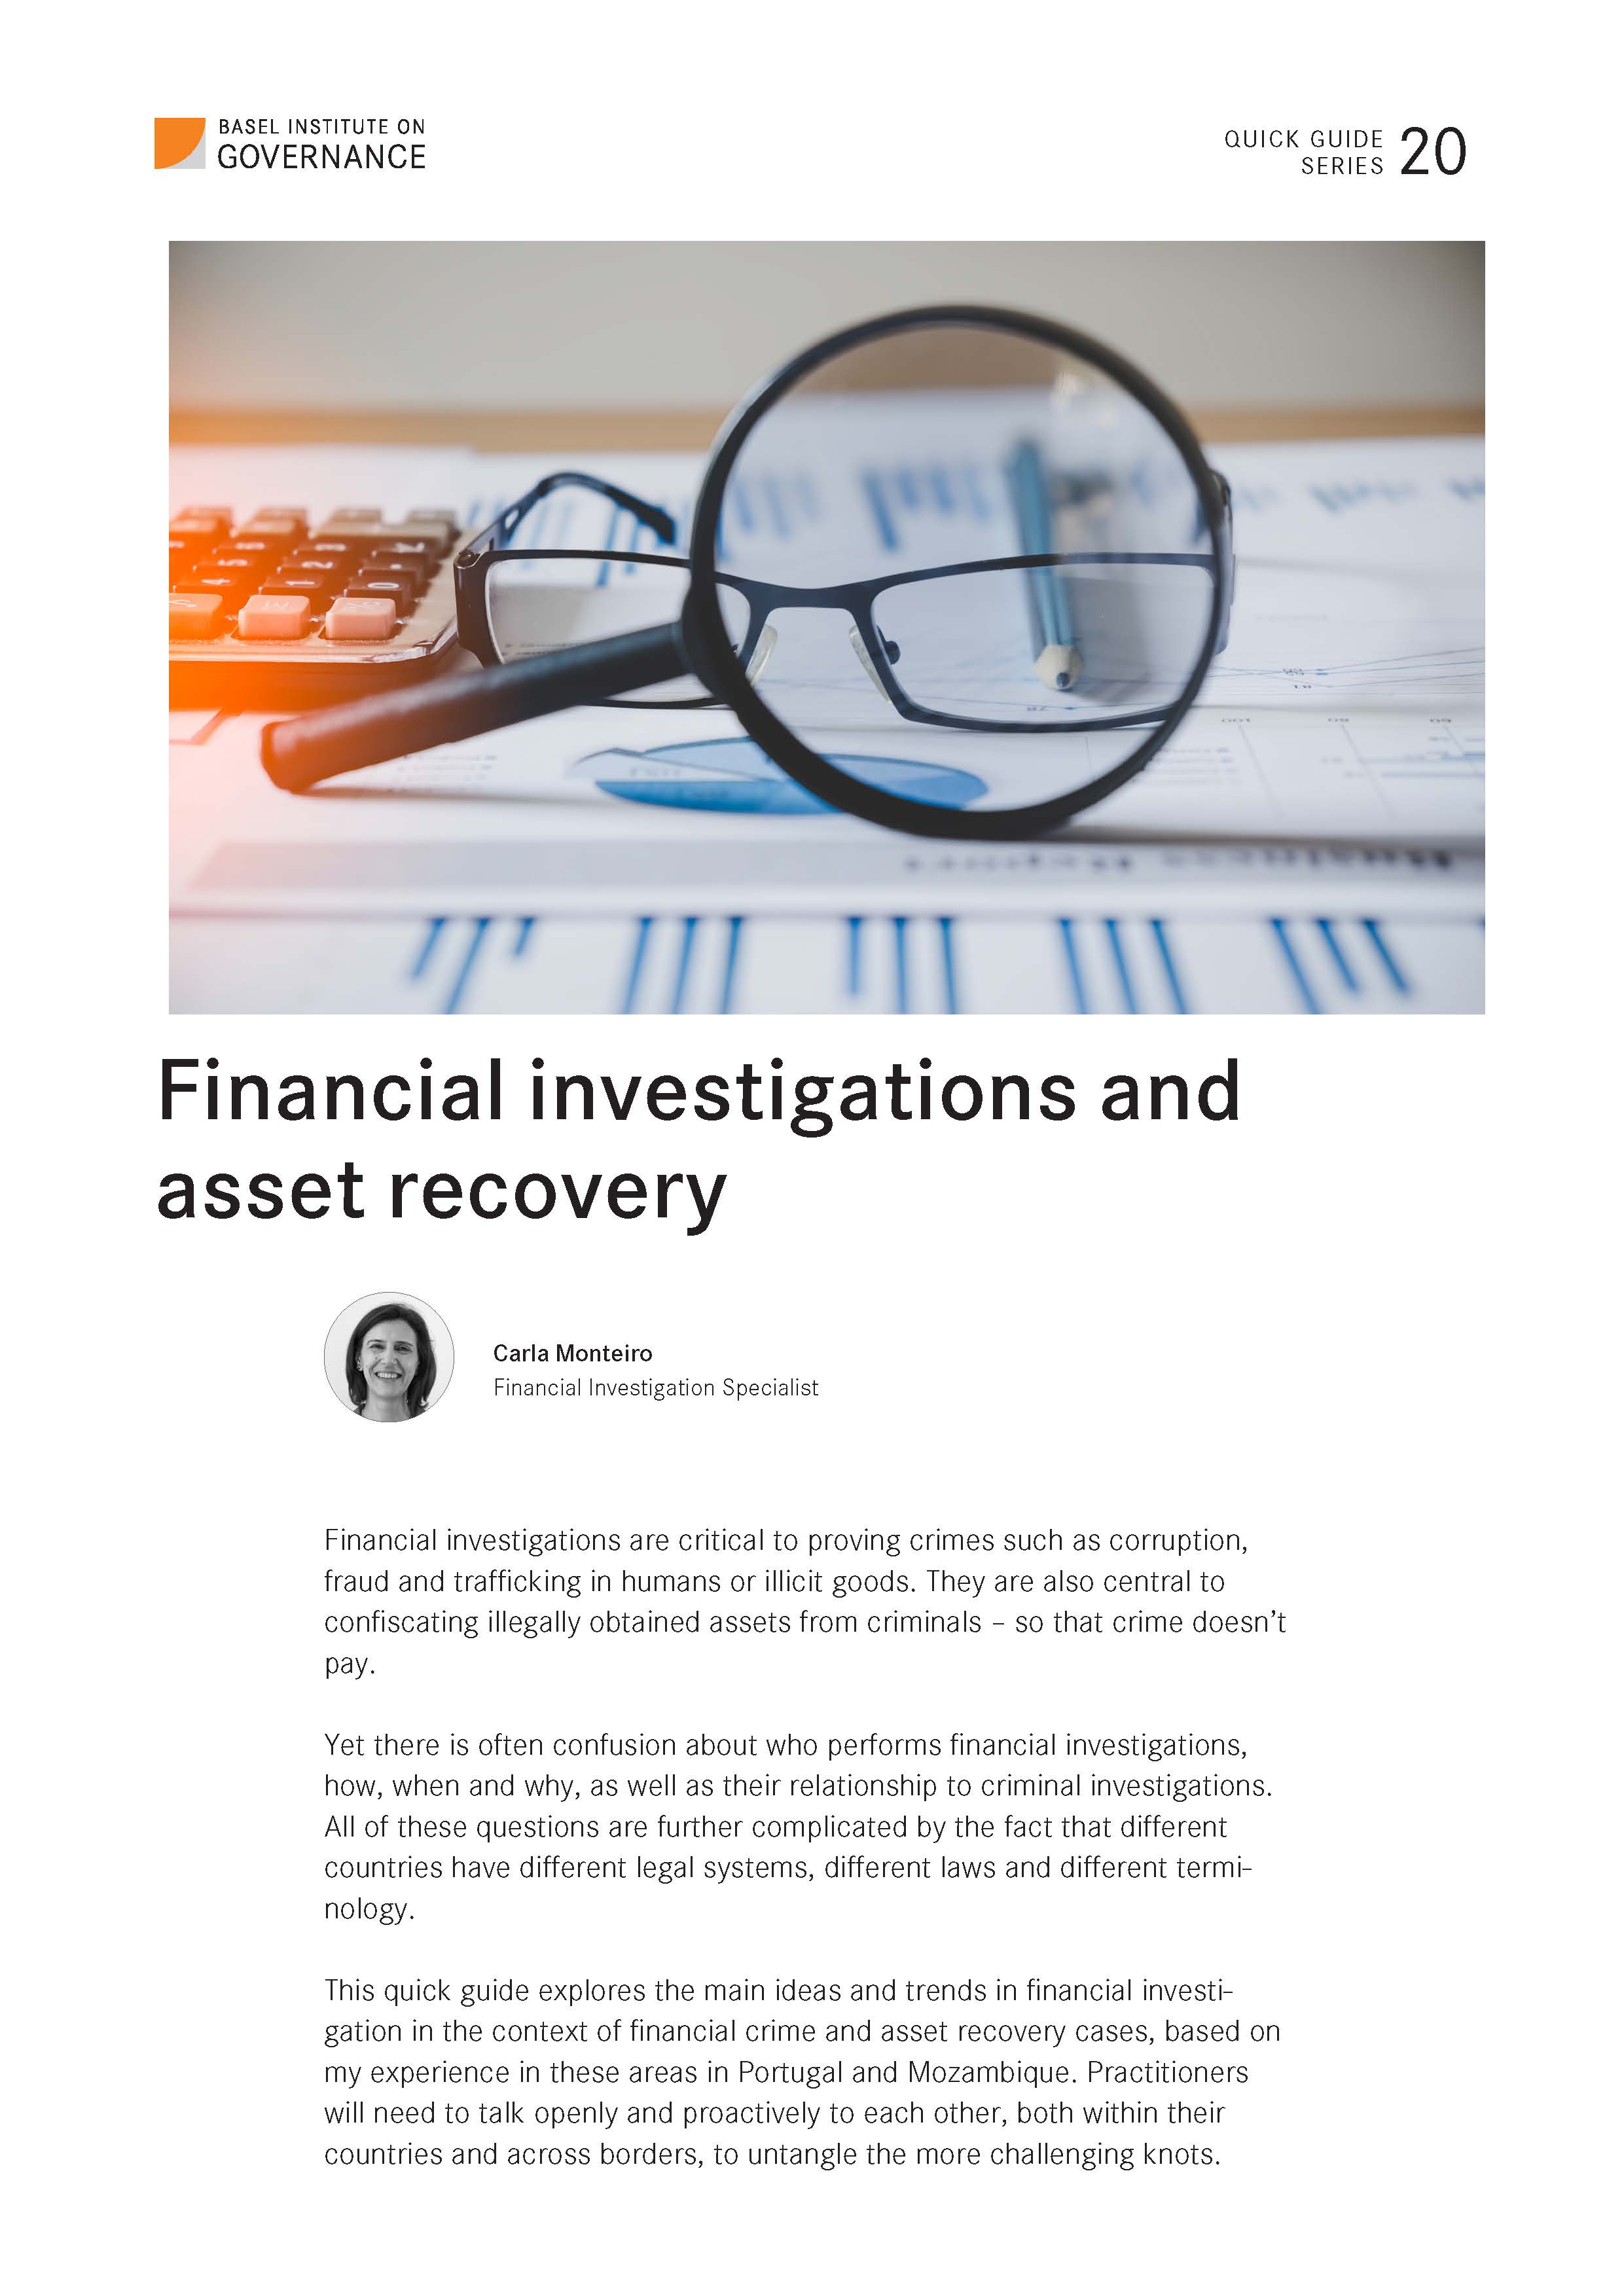 Cover page of Financial investigations and asset recovery guide